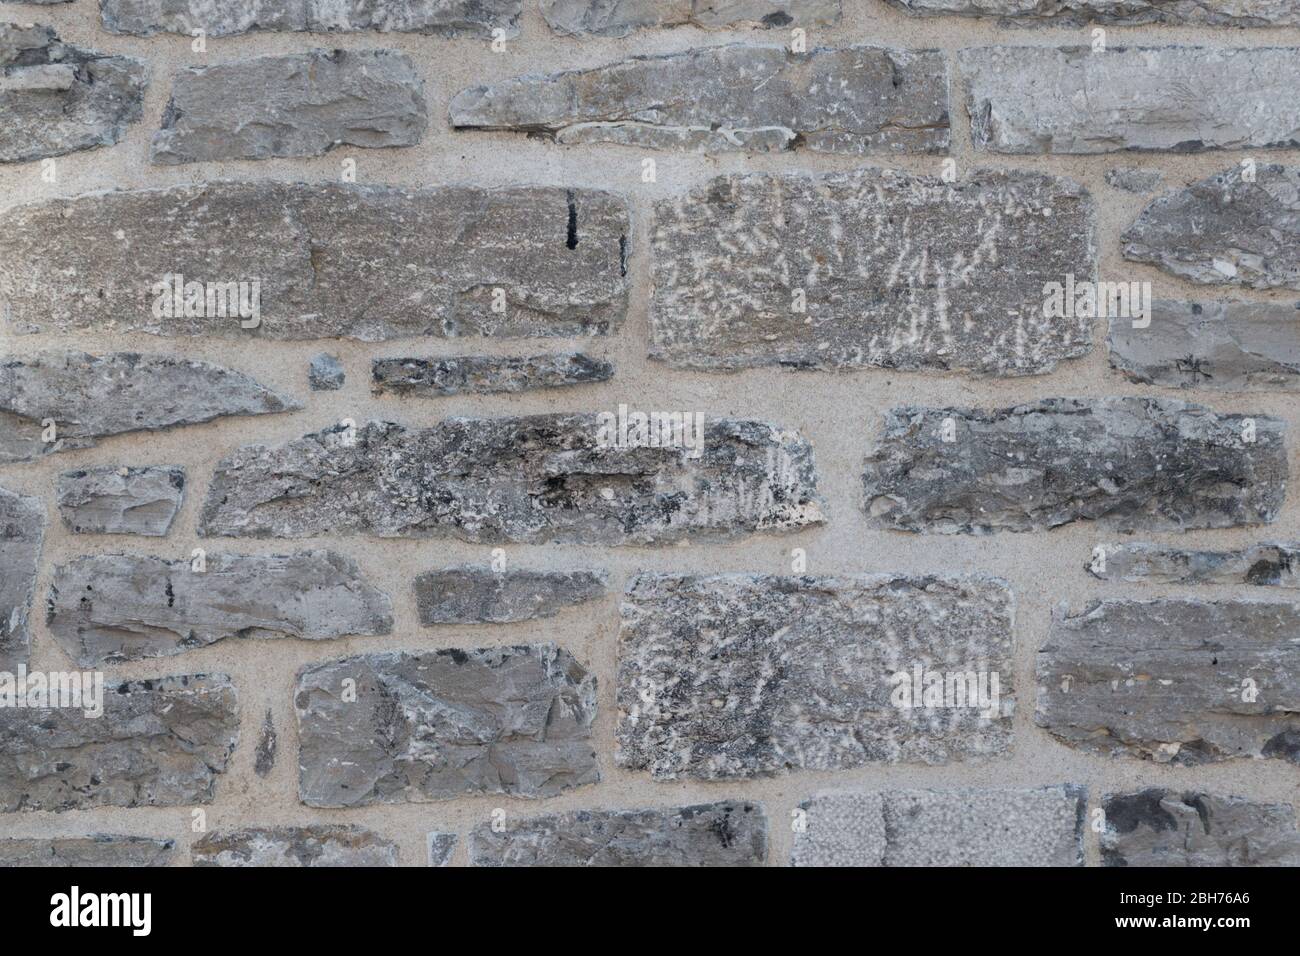 945 Chiseled Stone Brick Images, Stock Photos, 3D objects